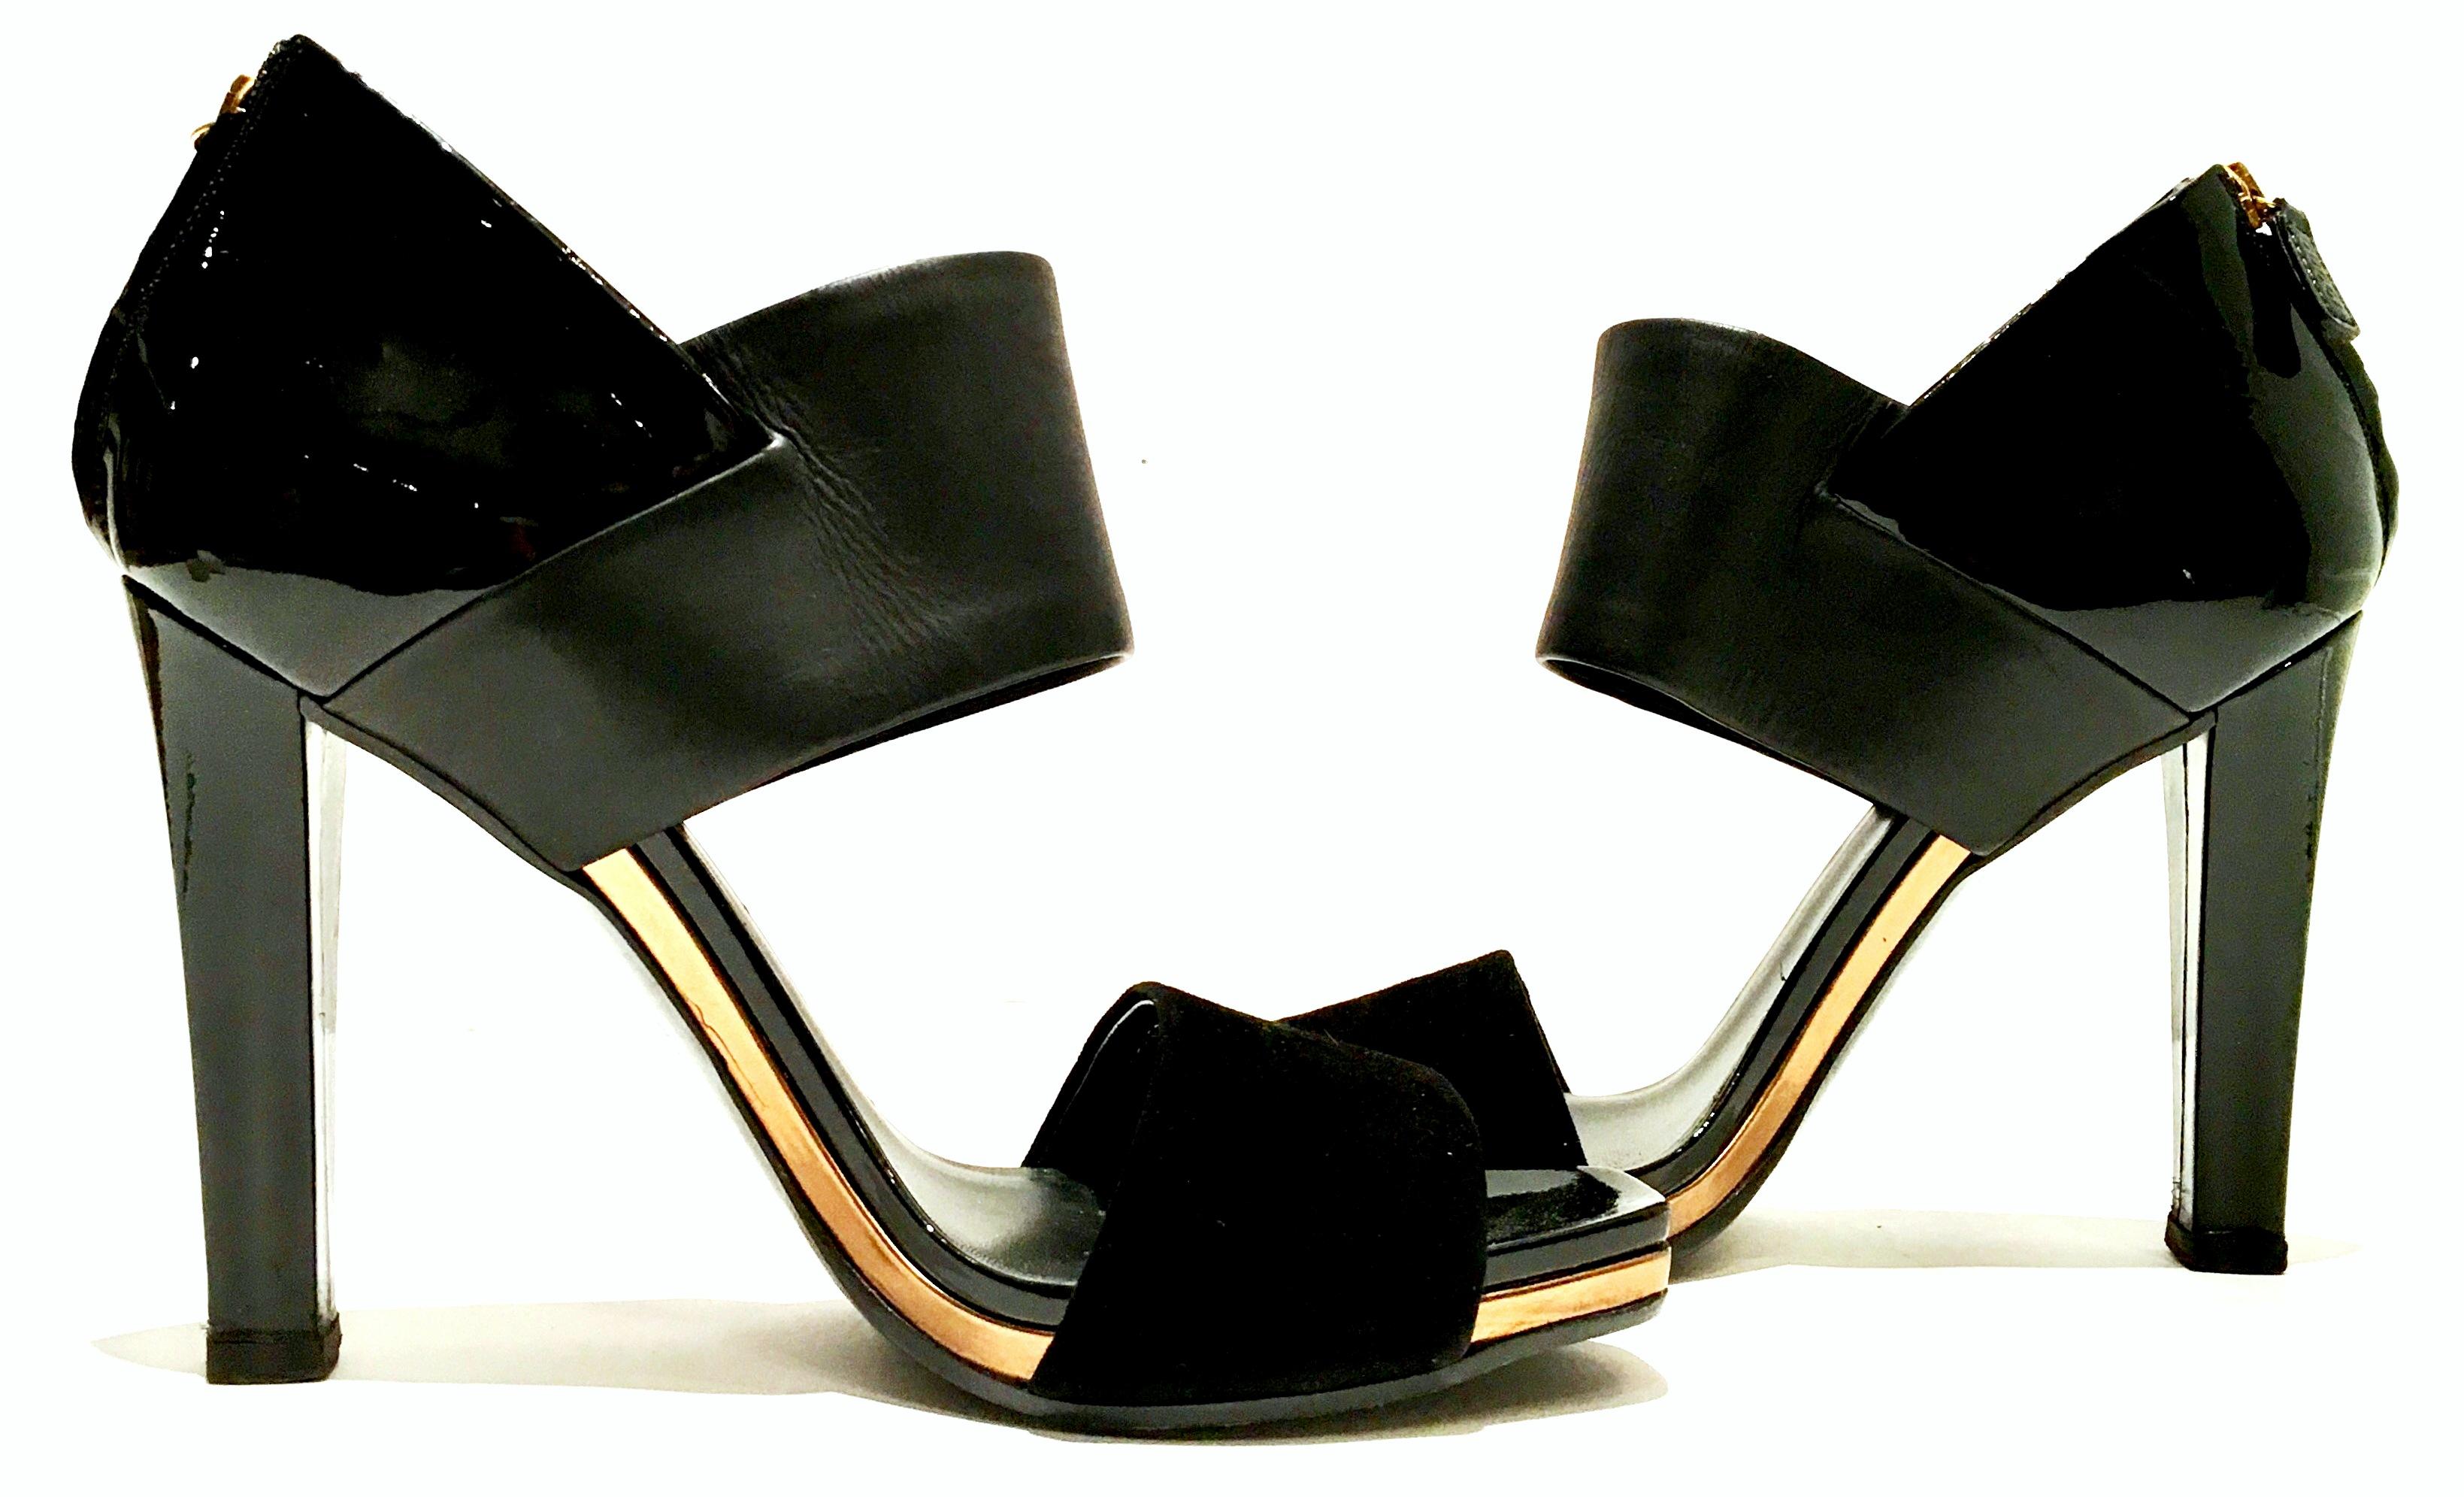 21st Century Gucci leather patent leather and suede strap platforms shoes, size 8.5. These new, out of the box black and bronze/gold platform strappy sandals feature a 4